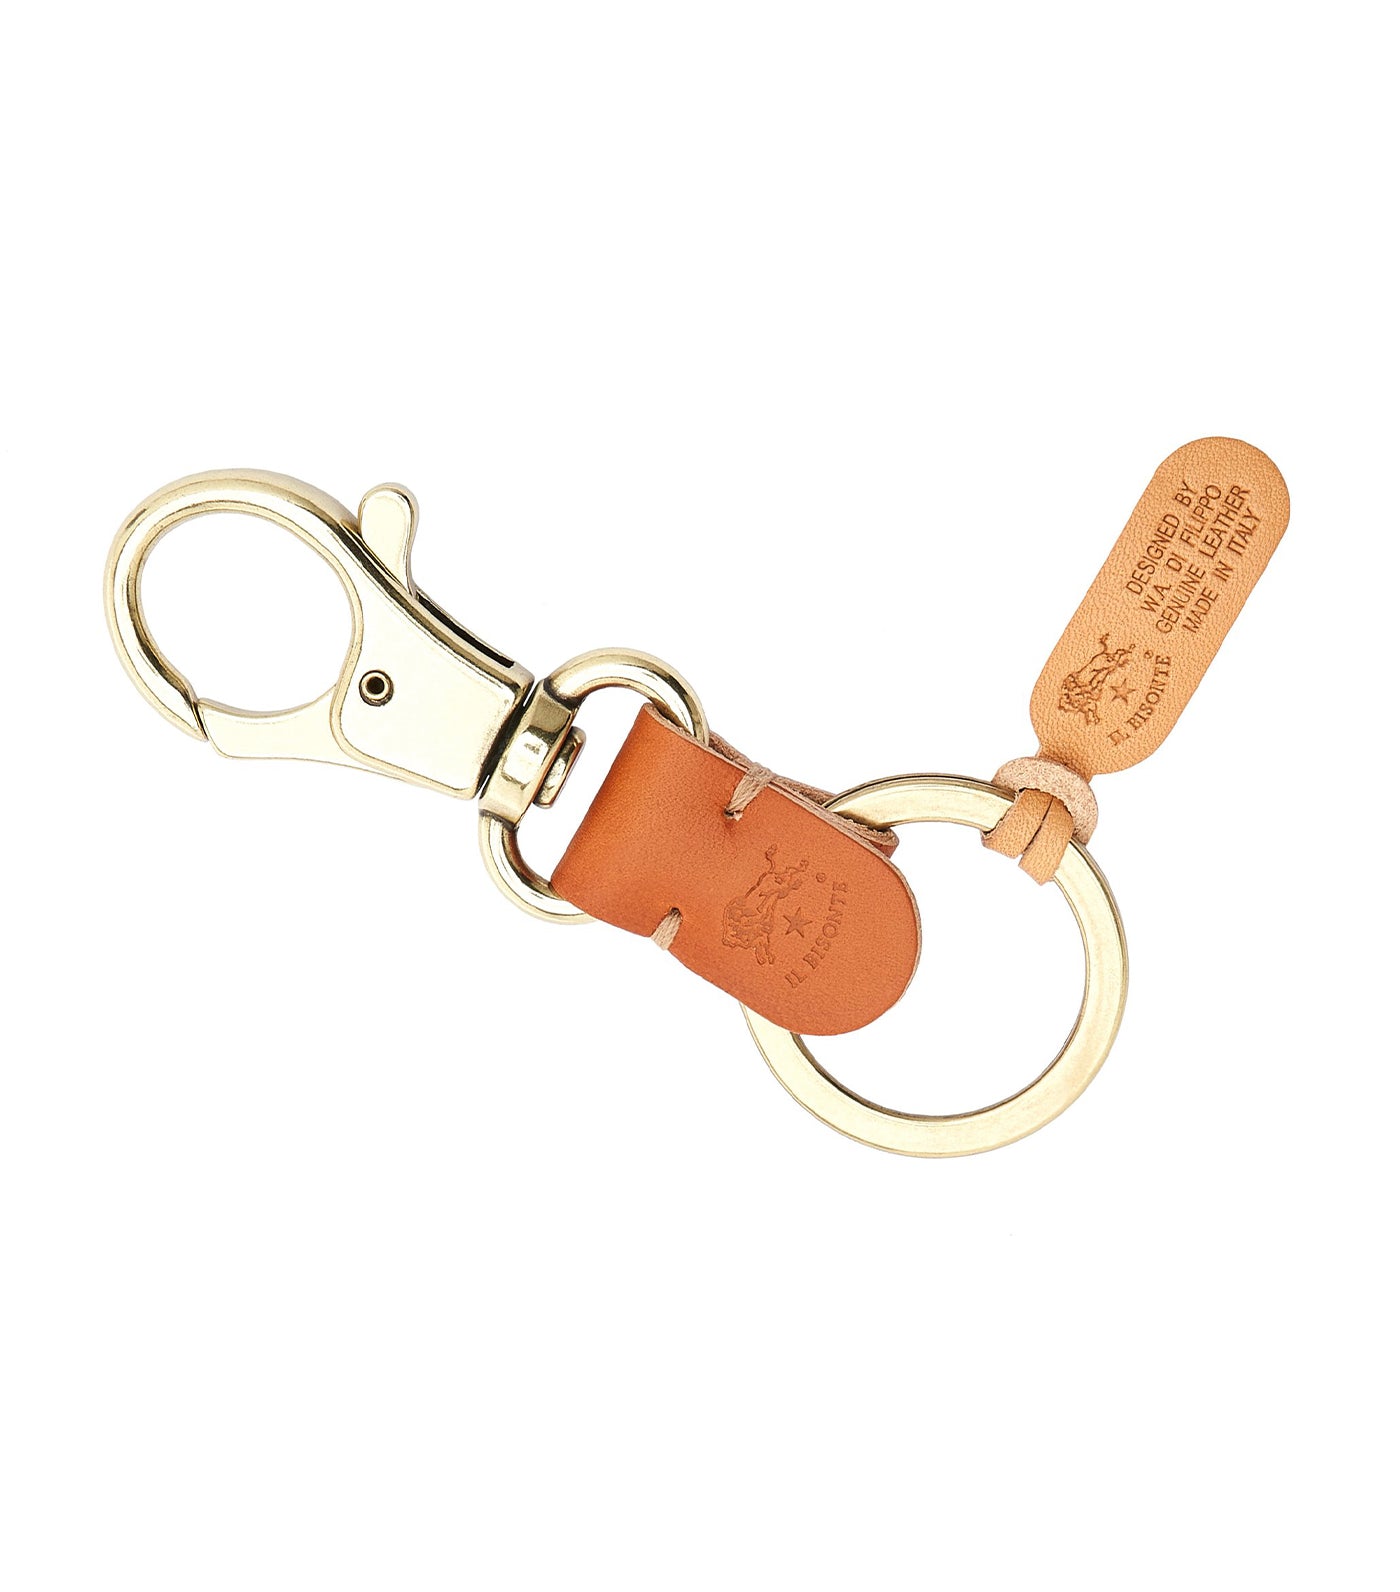 Gusto KeyRing | Black Saffiano woven Leather | Made in Italy